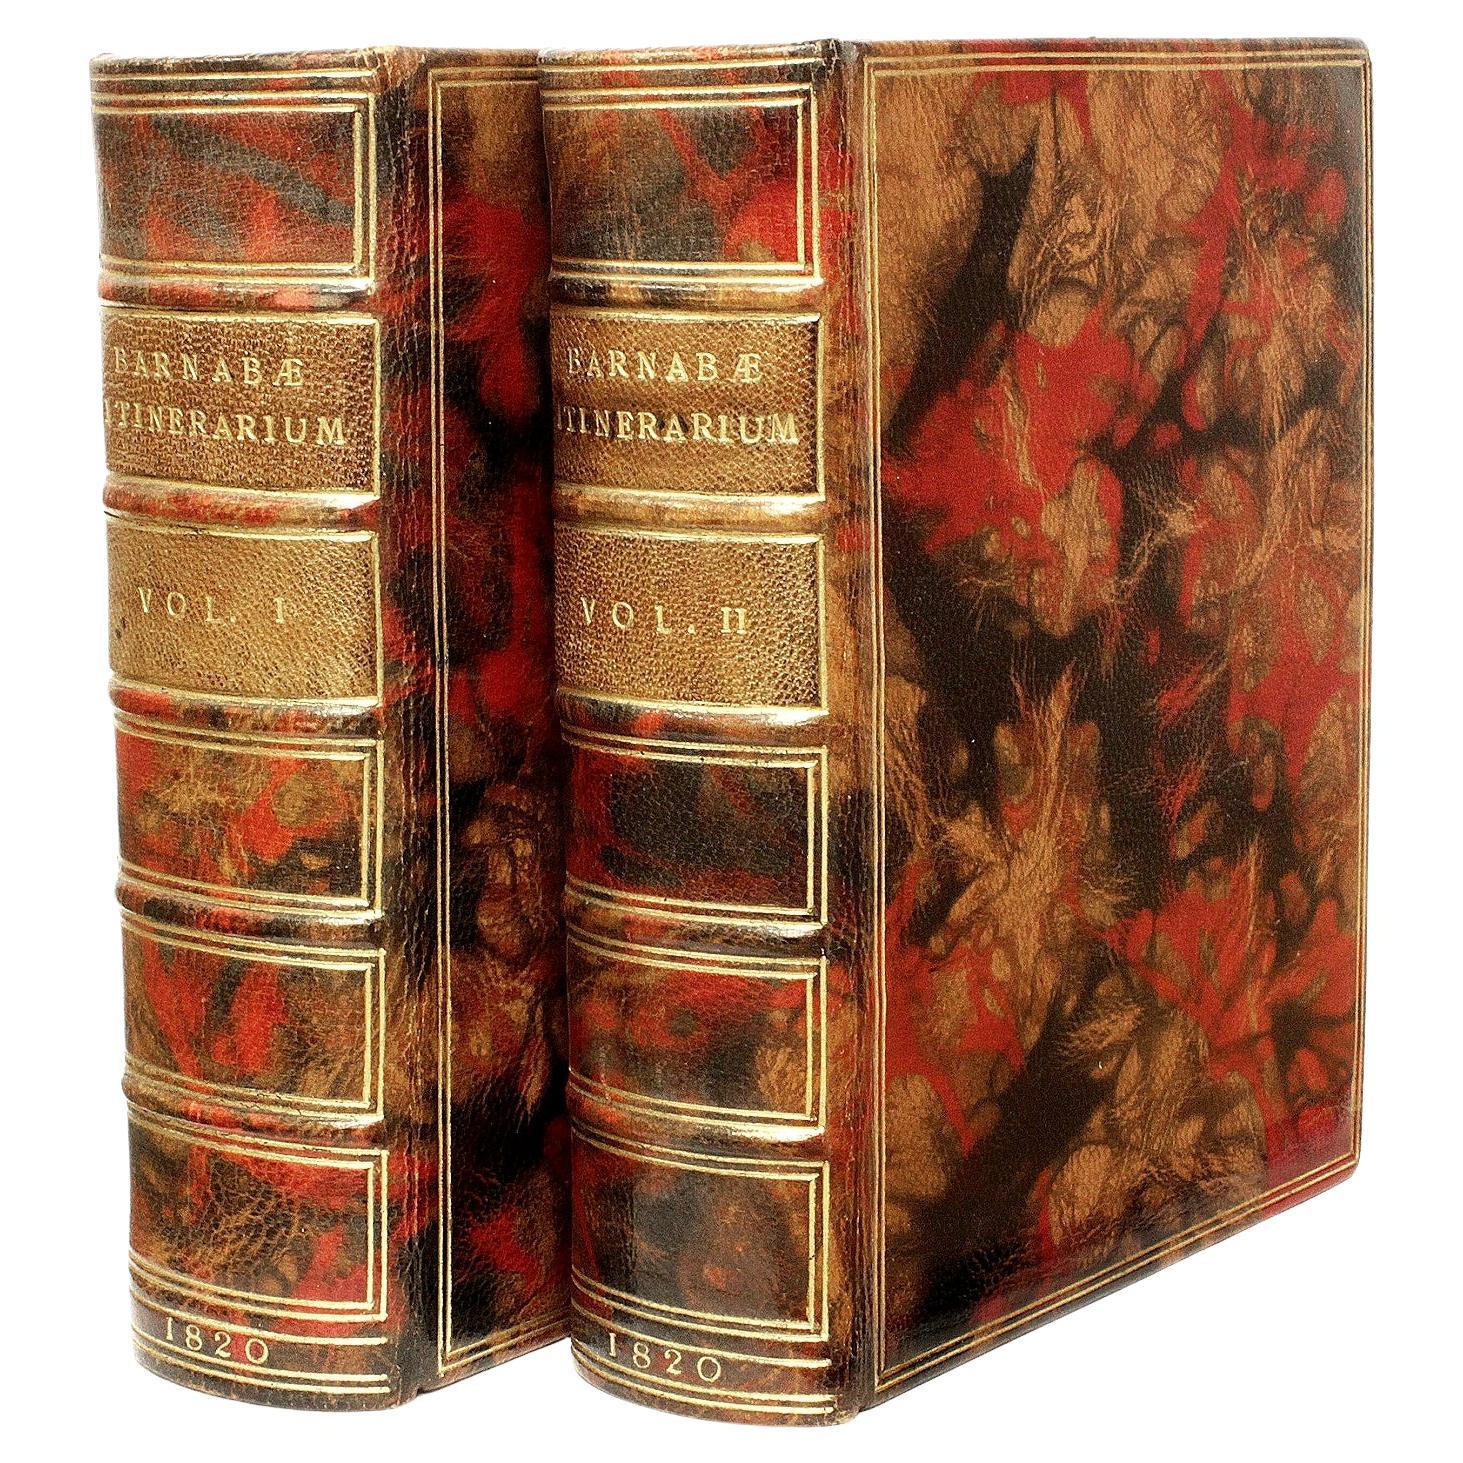 Barnabae Itenerarium, or Barnabee's Journal. 1820 - 2 vols - BOUND BY DE COVERLY For Sale